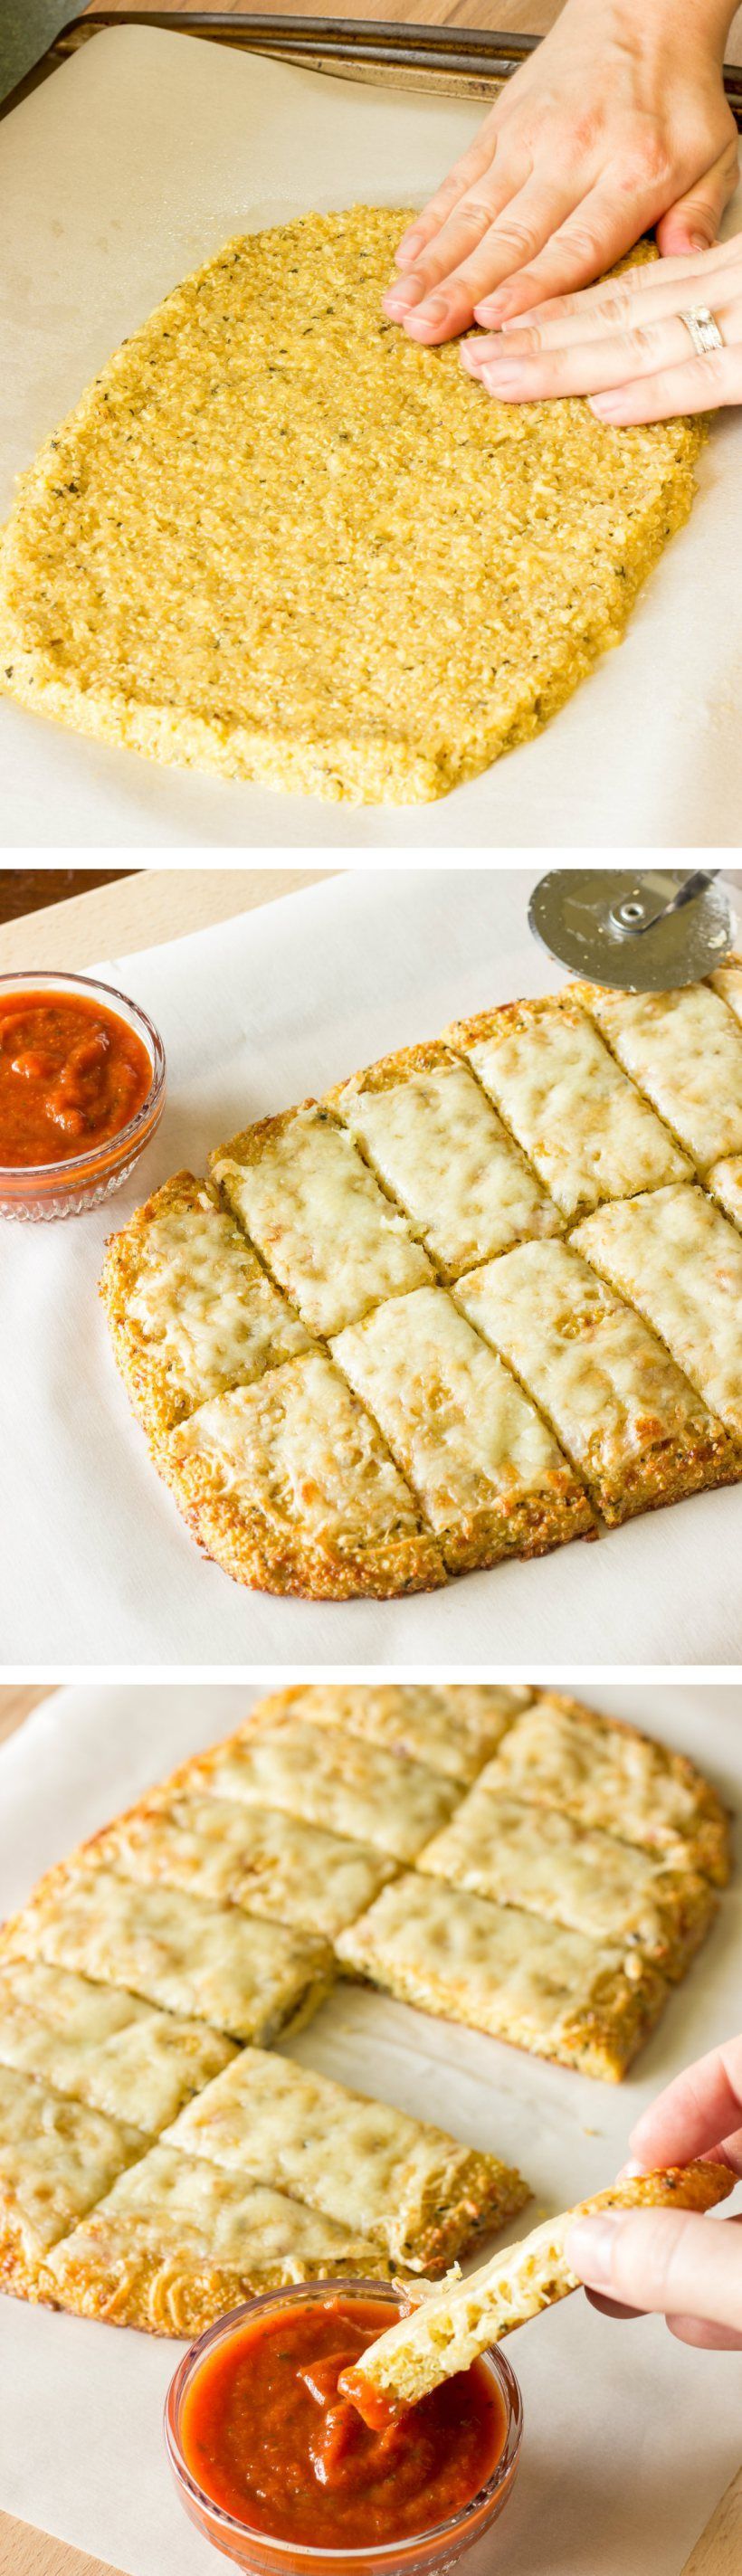 Quinoa Crust for Pizza or Cheesy Garlic ‘Bread’. Use Your MRC HNS Tomato Basil to make an amazing dipping